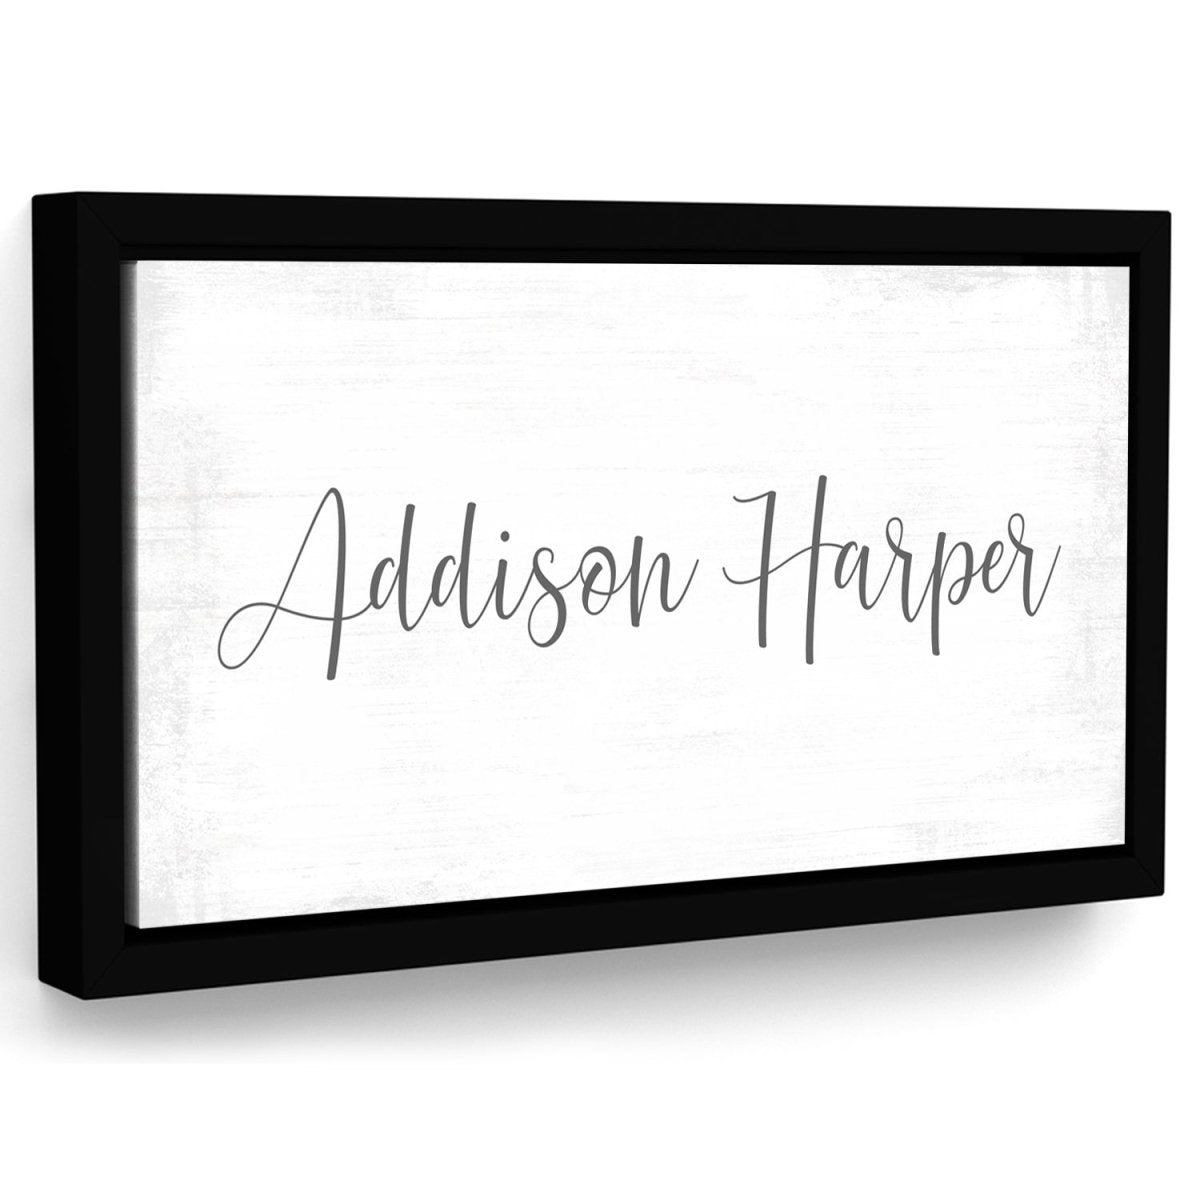 Baby Girl's Personalized Name Canvas Wall Art for the Nursery Room - Pretty Perfect Studio